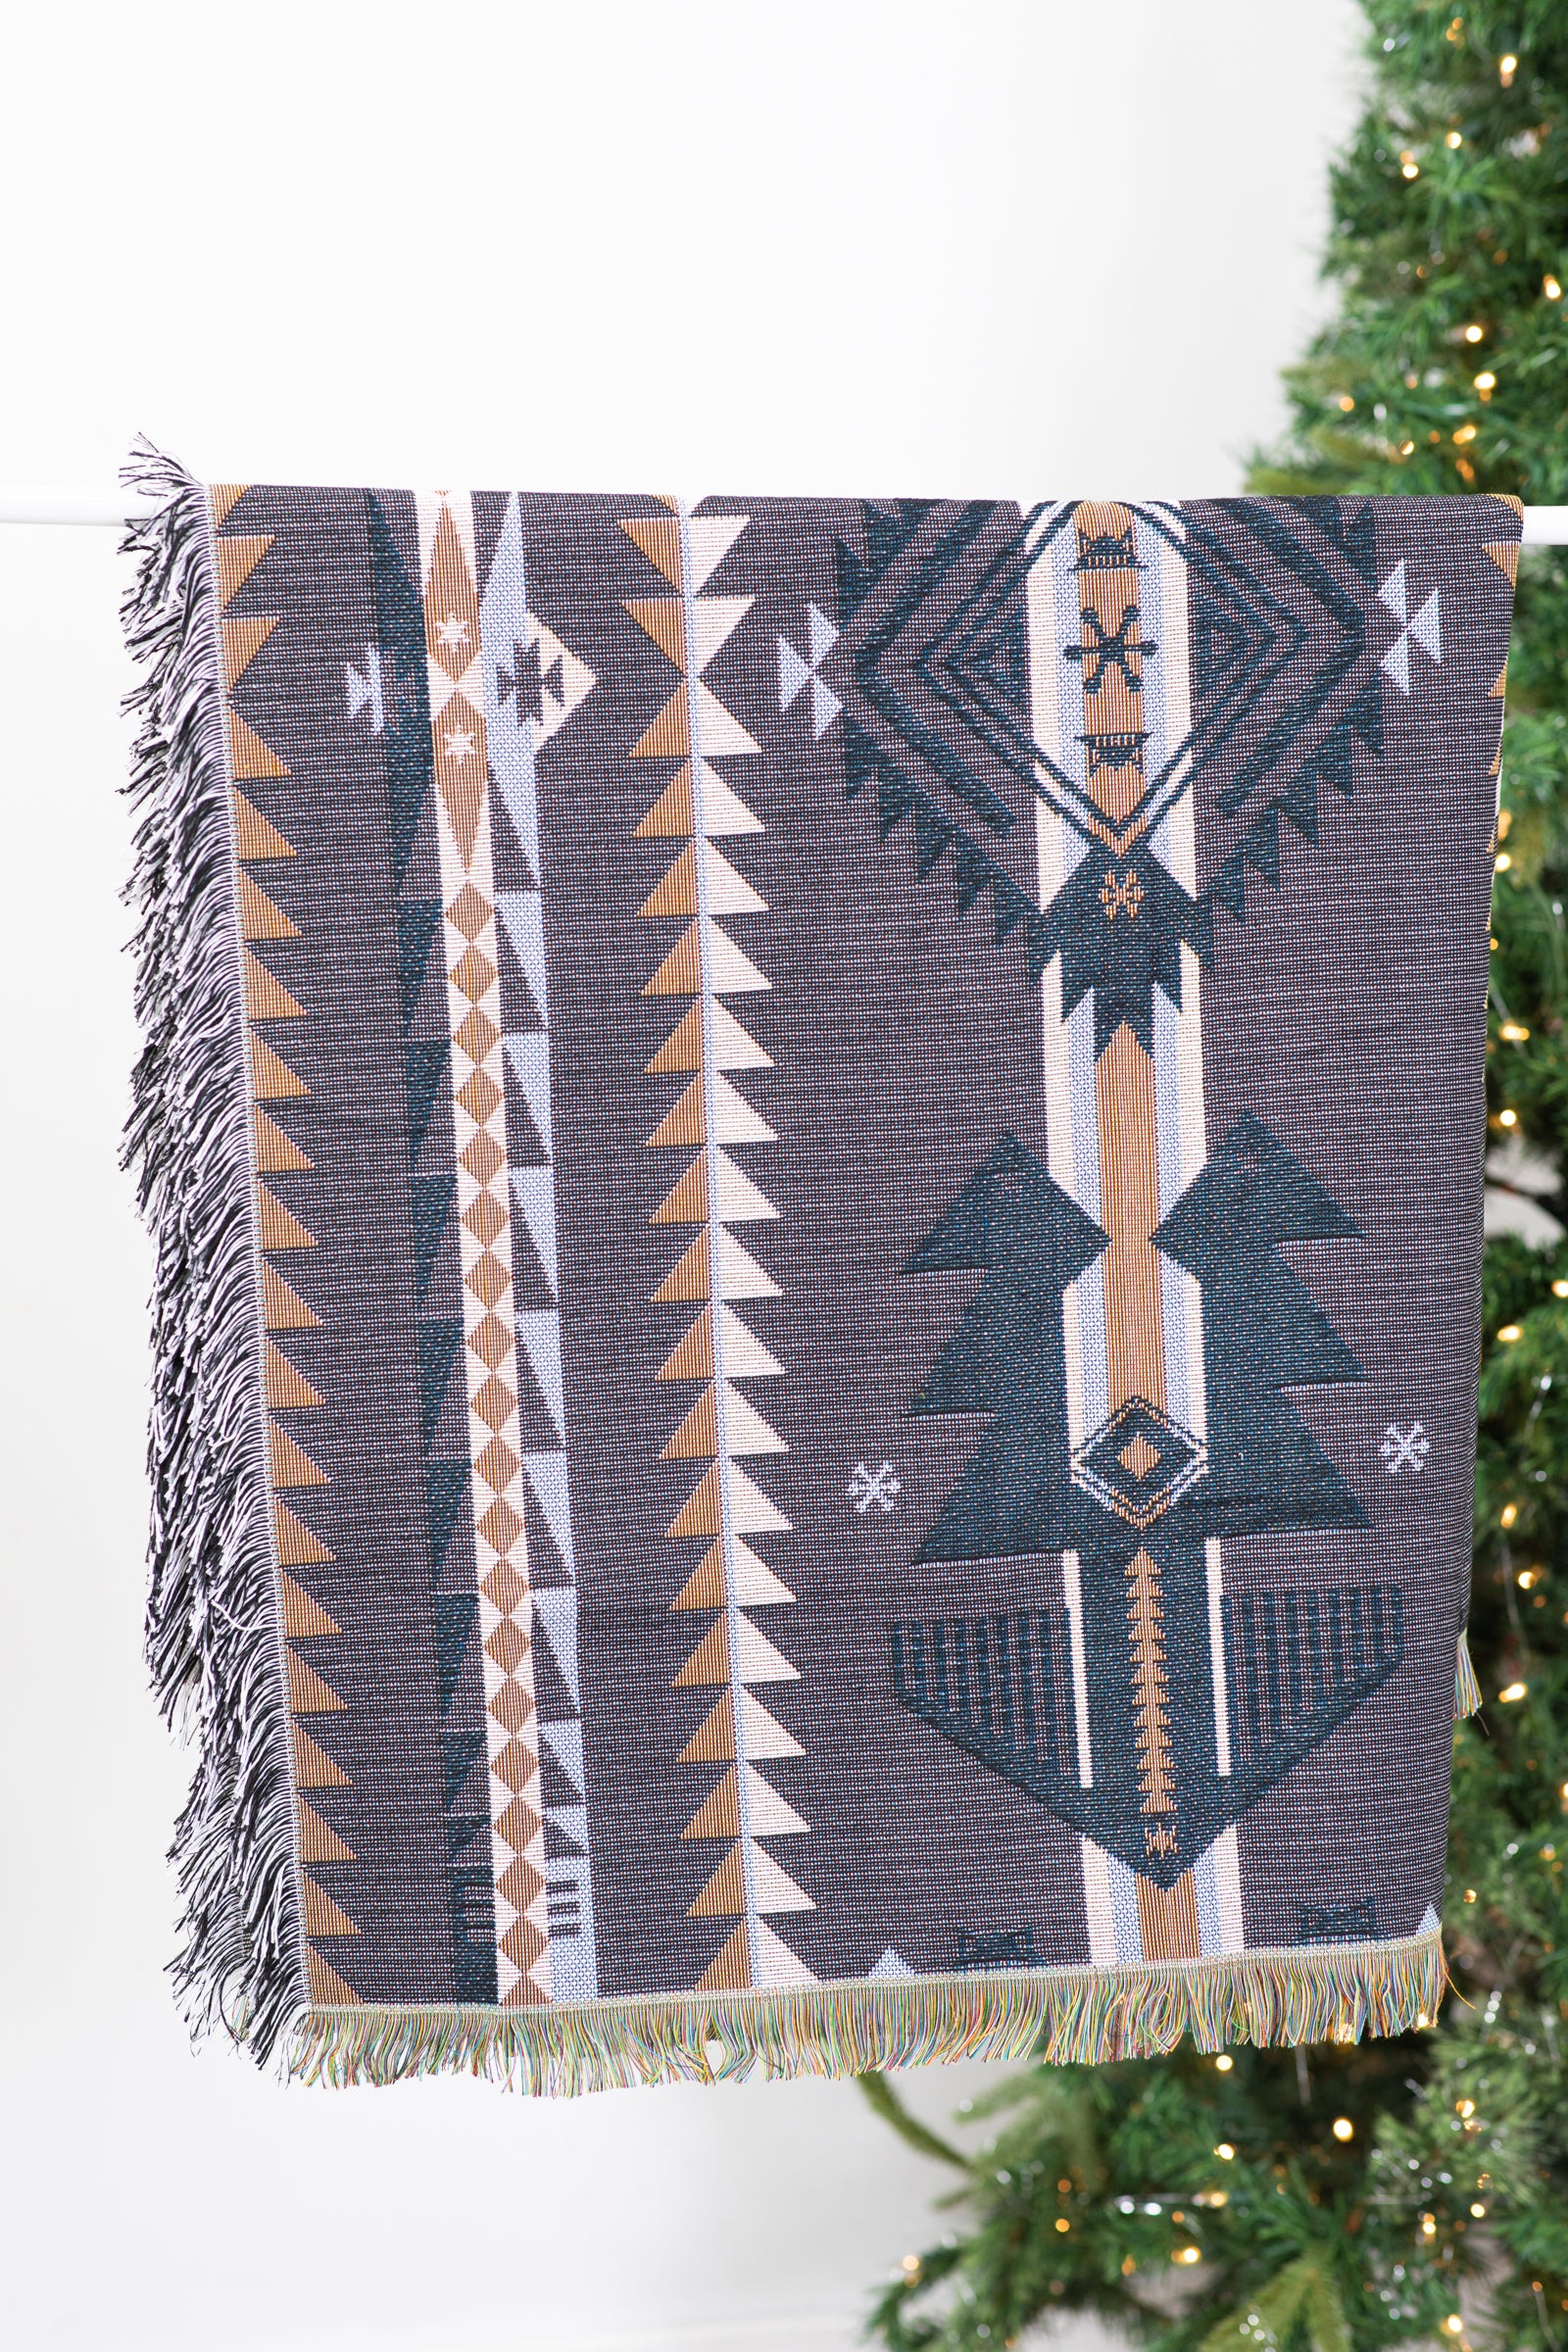 Charcoal and Tan Aztec Blanket With Fringe